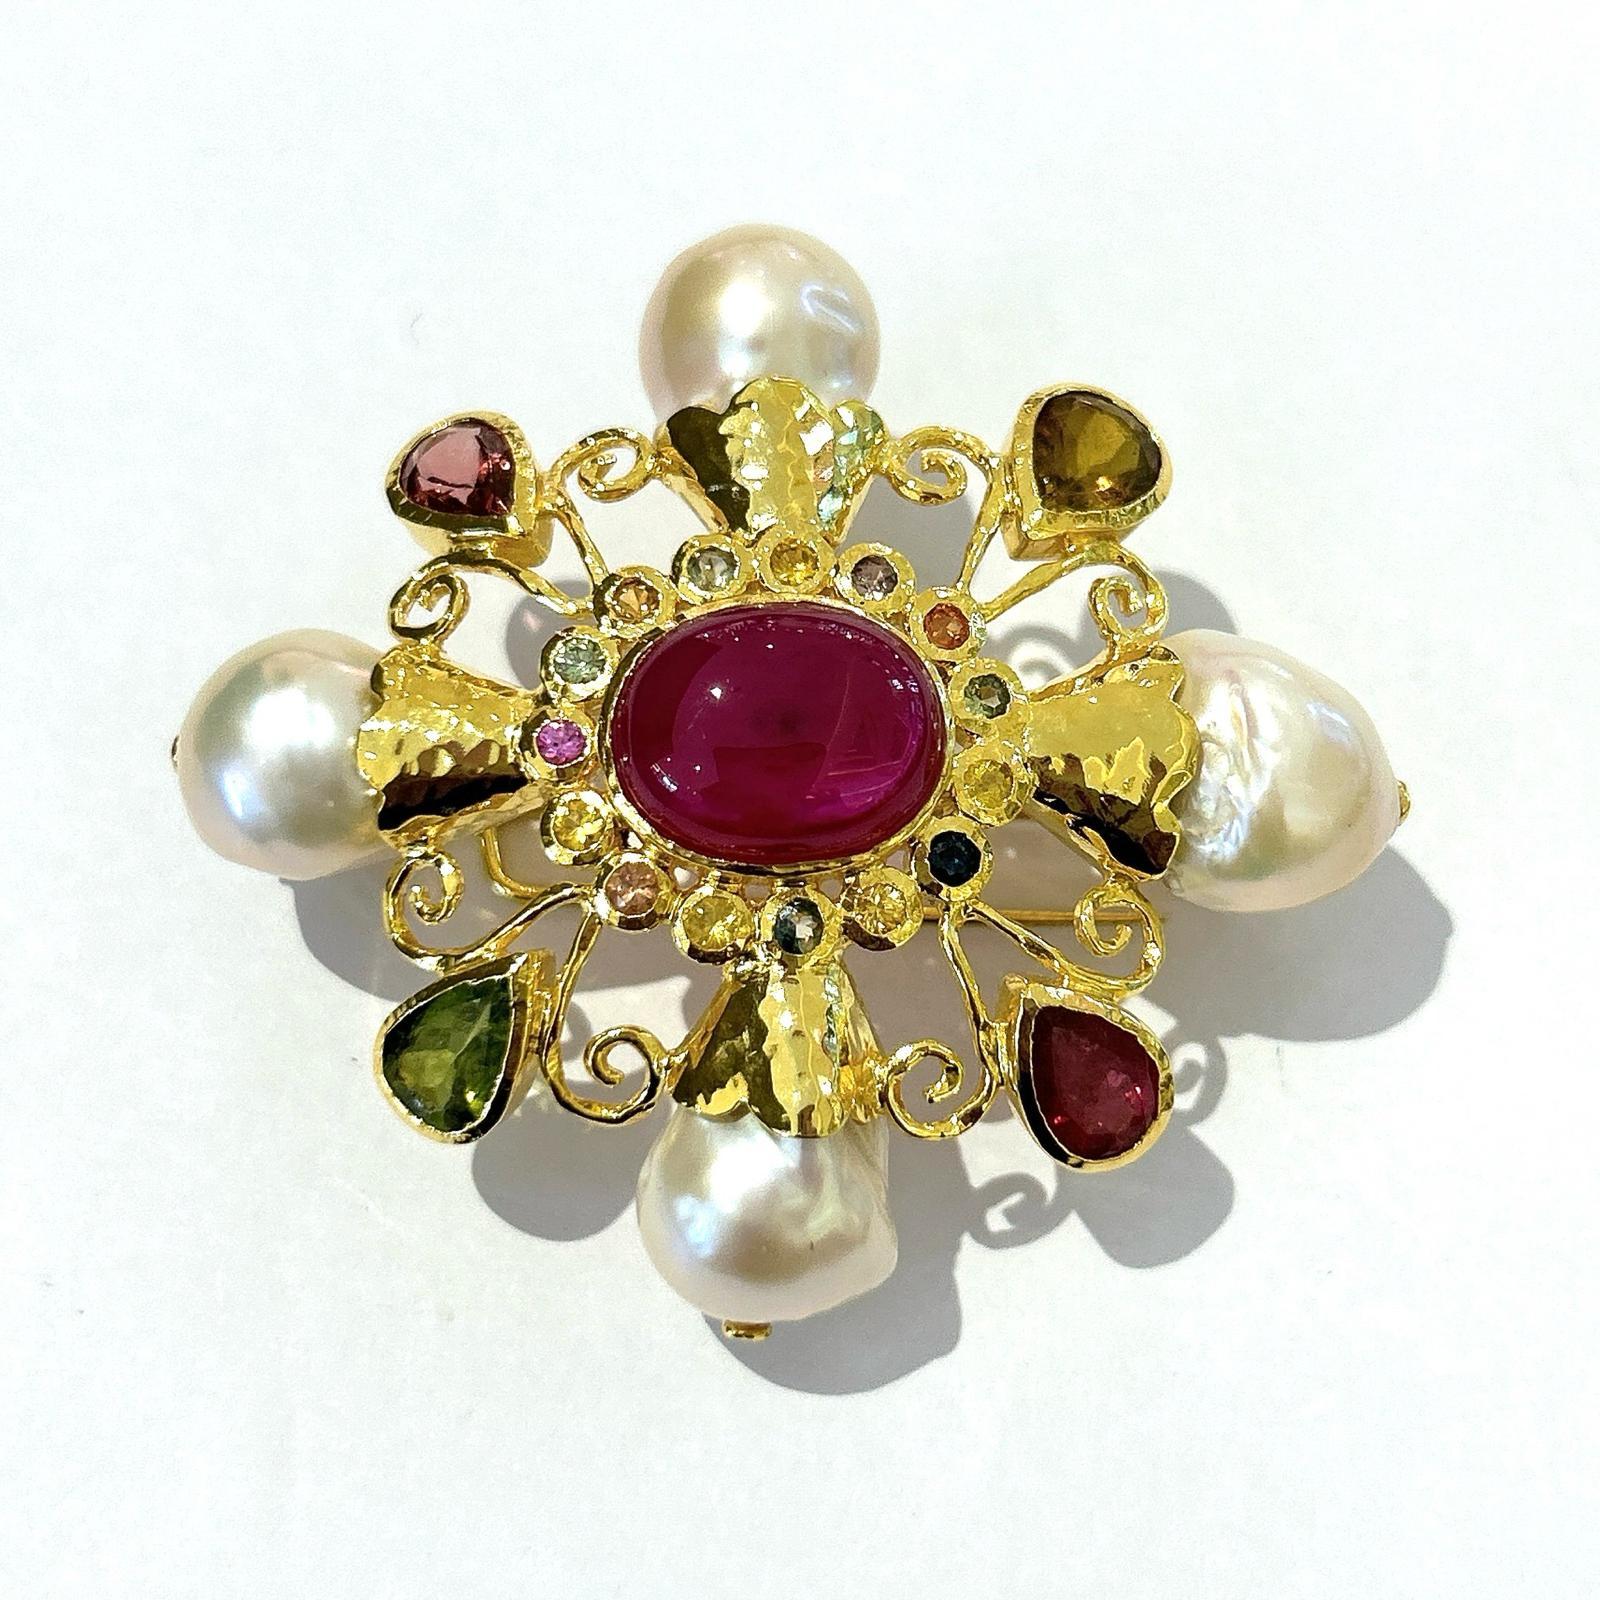 Bochic “Orient” Multi Sapphires & Ruby Brooch Set In 18K Gold & Silver 

Natural Red Ruby, Oval shape - 15 carat 
Multi color Natural Sapphires from Sri Lanka 
2 carat
Natural Tourmaline - 5 Carats 
White South Sea Pearls 

The Brooch is from the